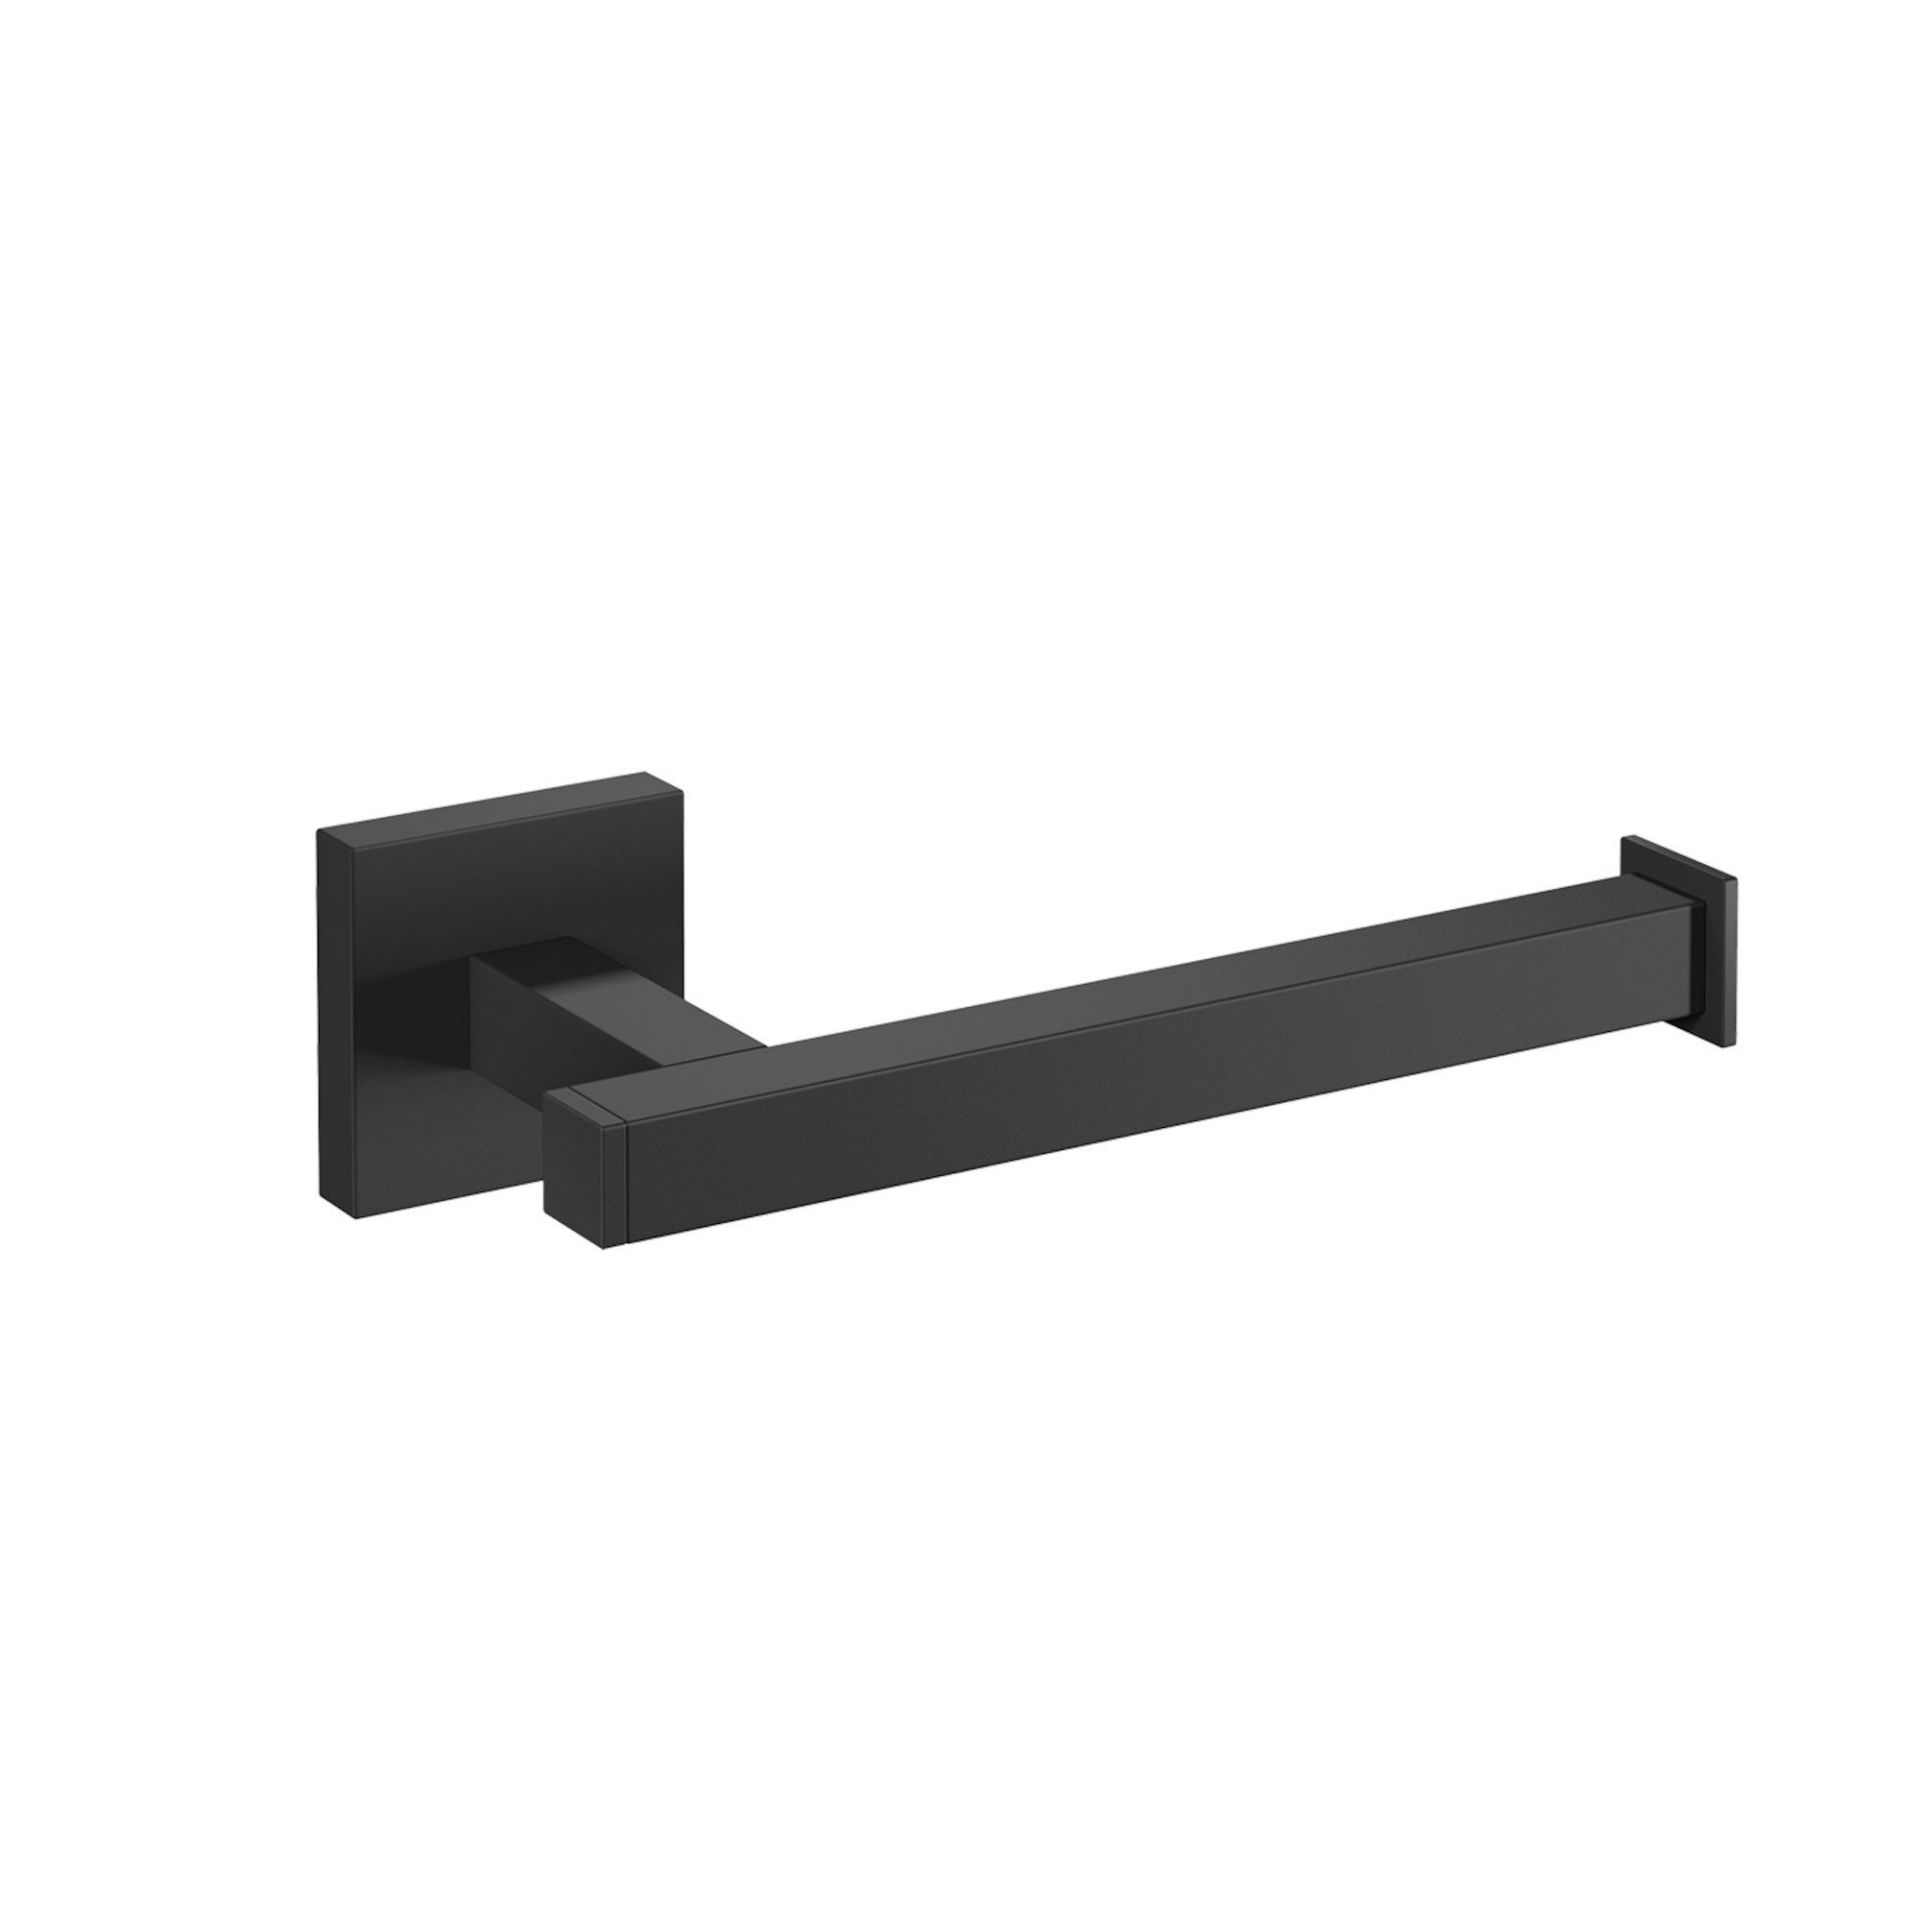 (YU1018) Iker Black Toilet Roll Holder Statement aesthetic for minimalist appeal Luxurious, c... - Image 2 of 3